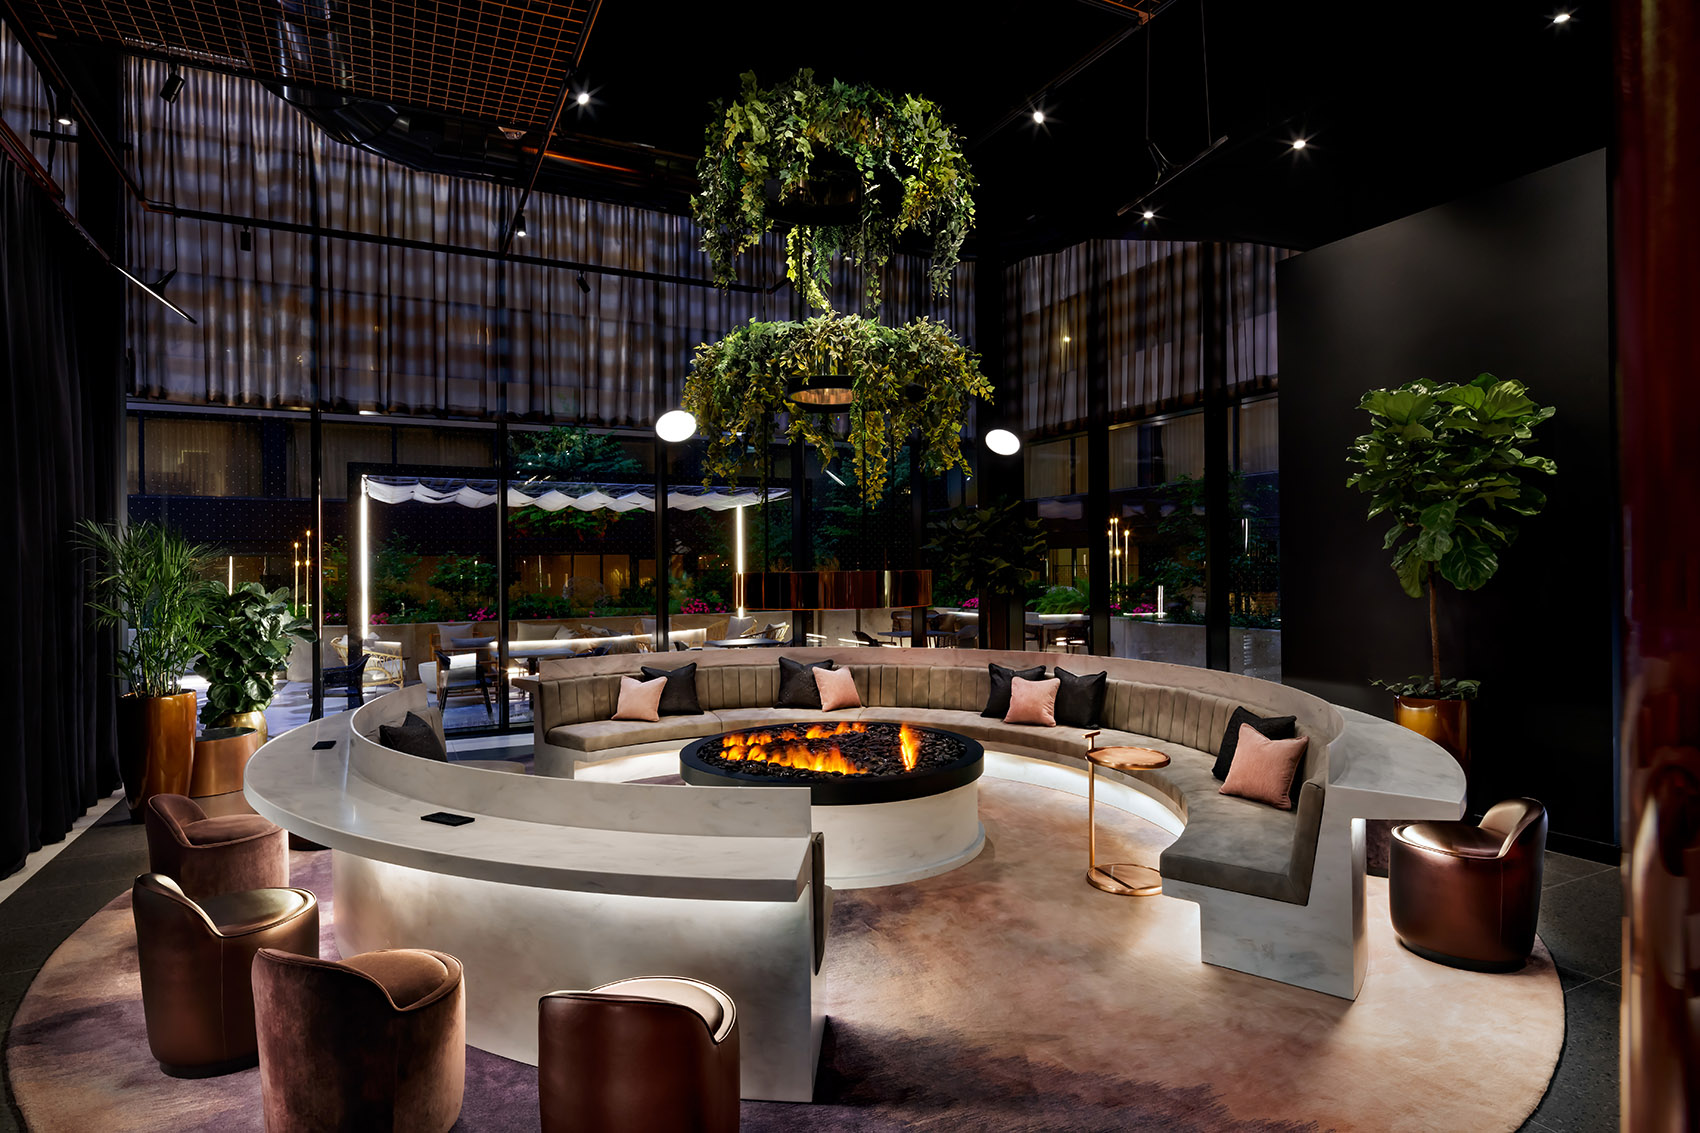 011 W Hotel Toronto By Sid Lee Architecture 